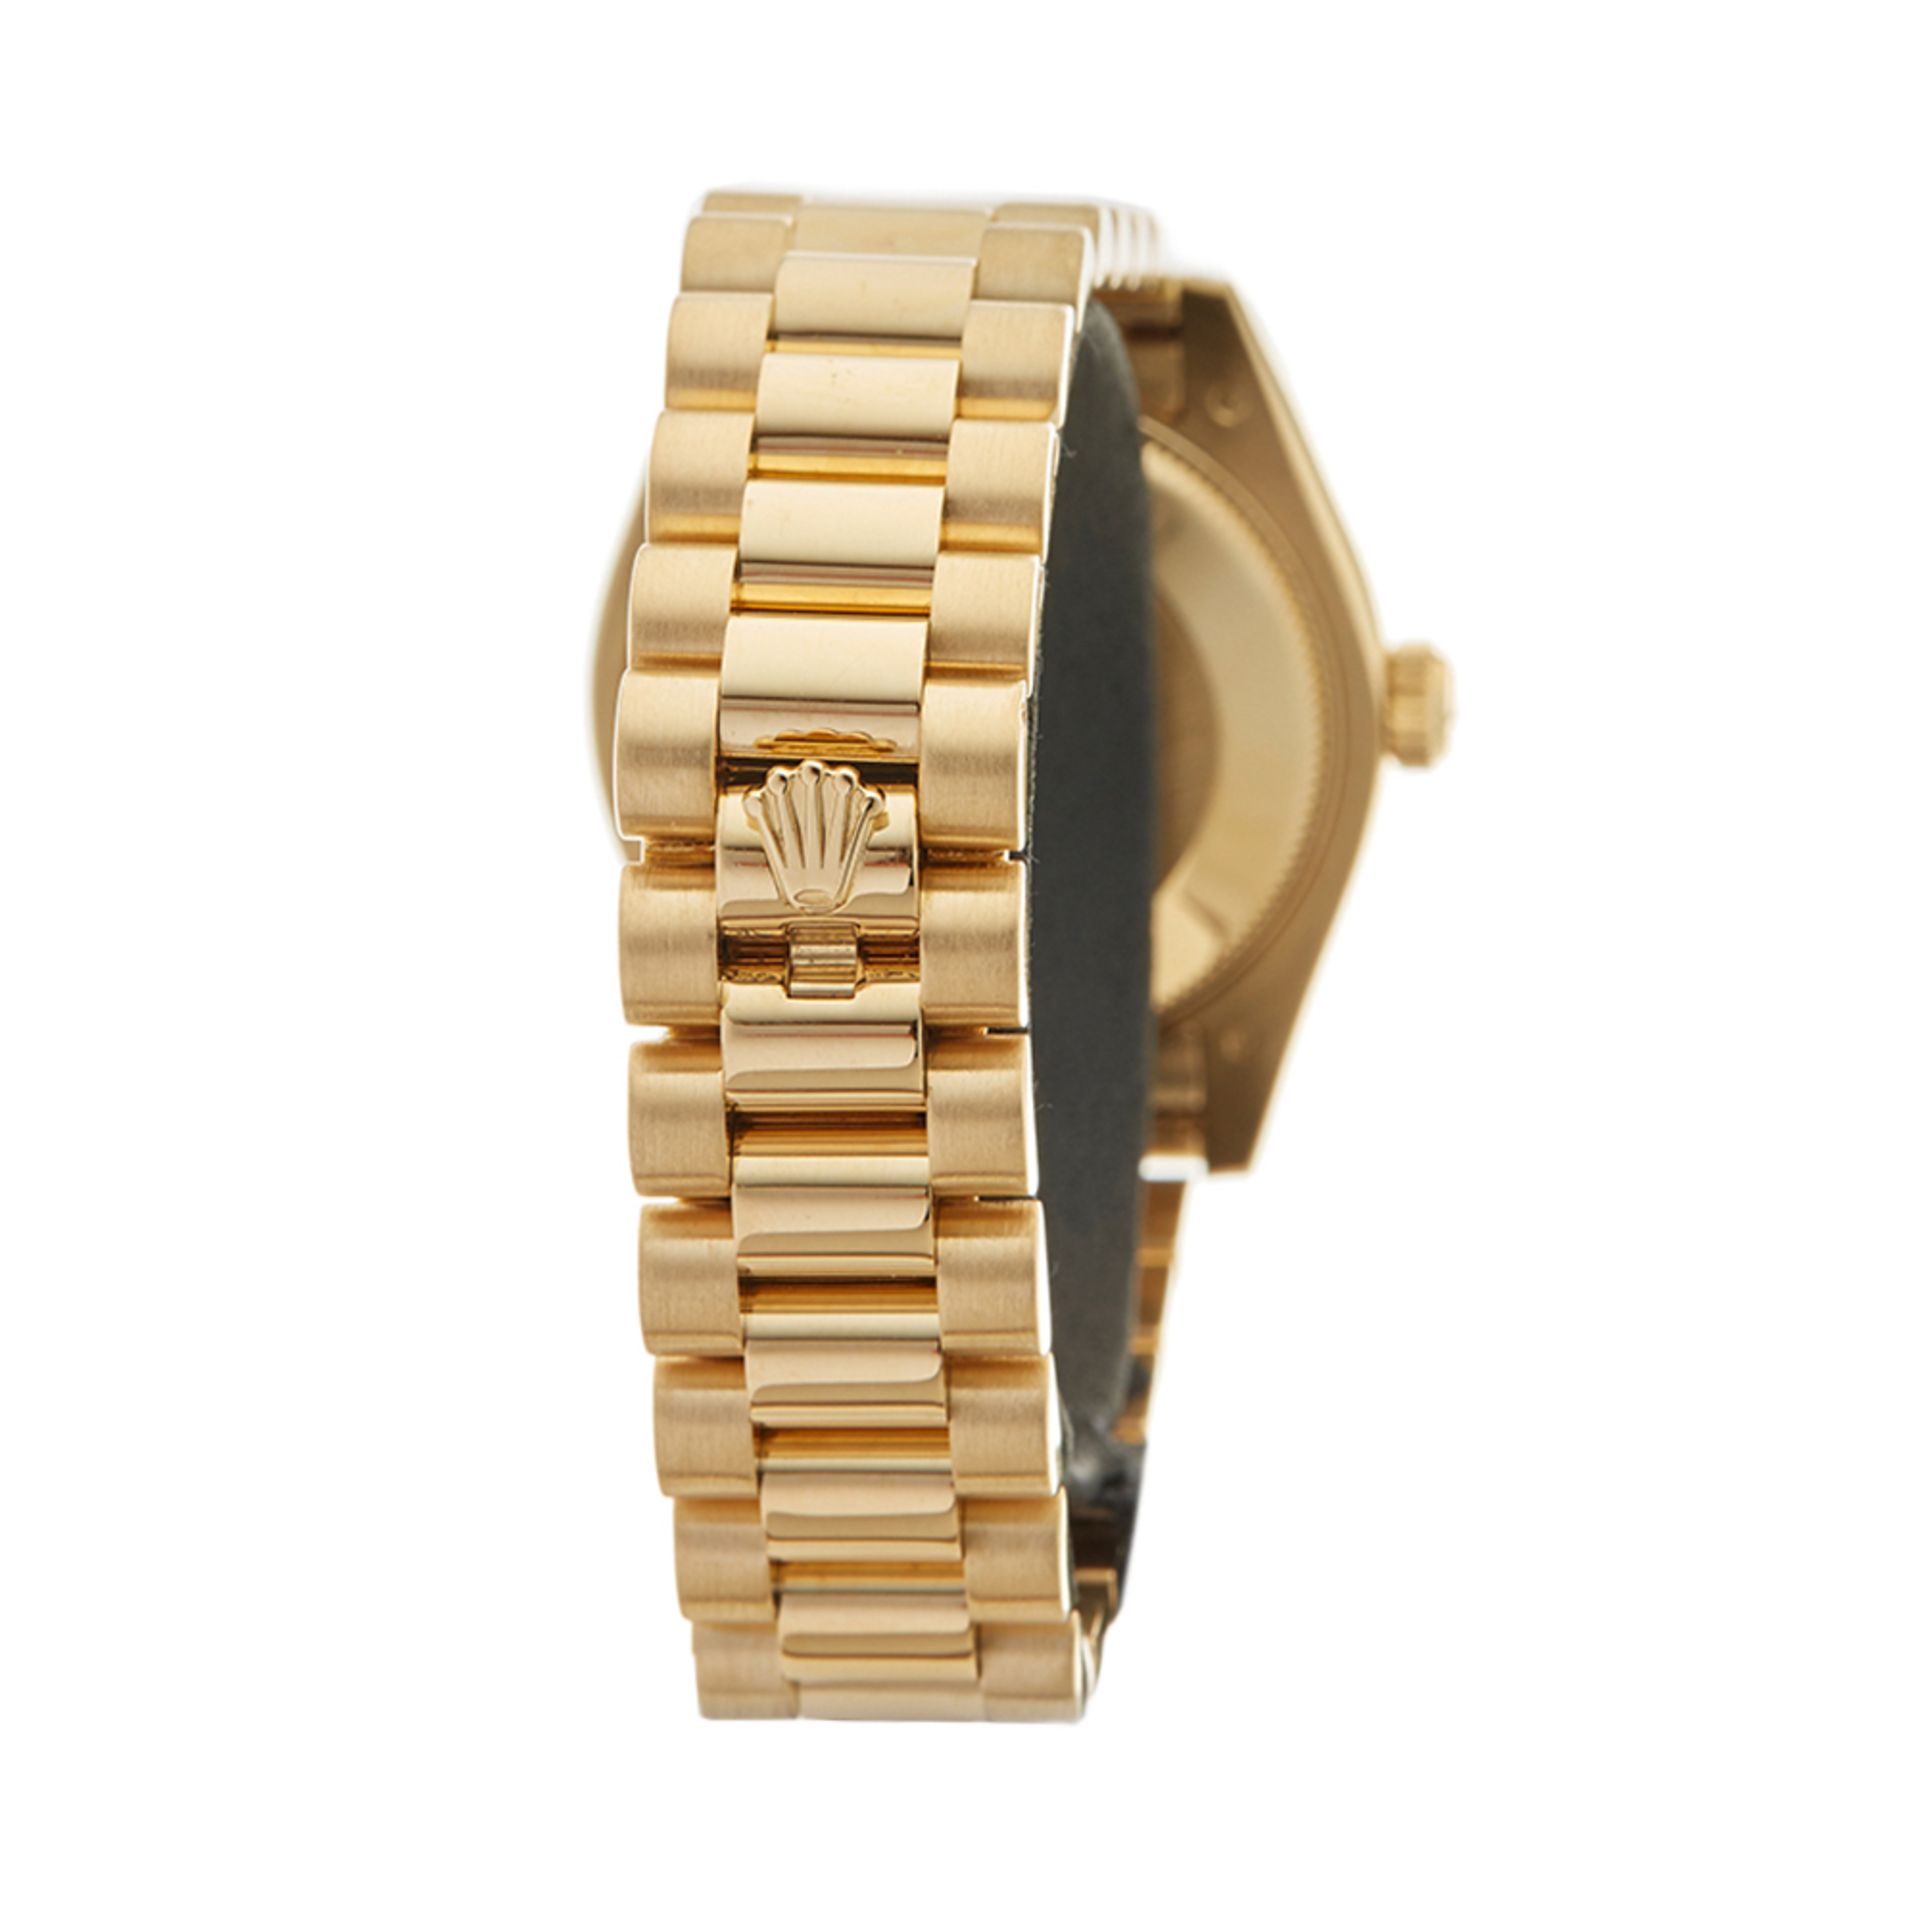 Datejust 31mm 18K Yellow Gold - 178158 - Image 6 of 8